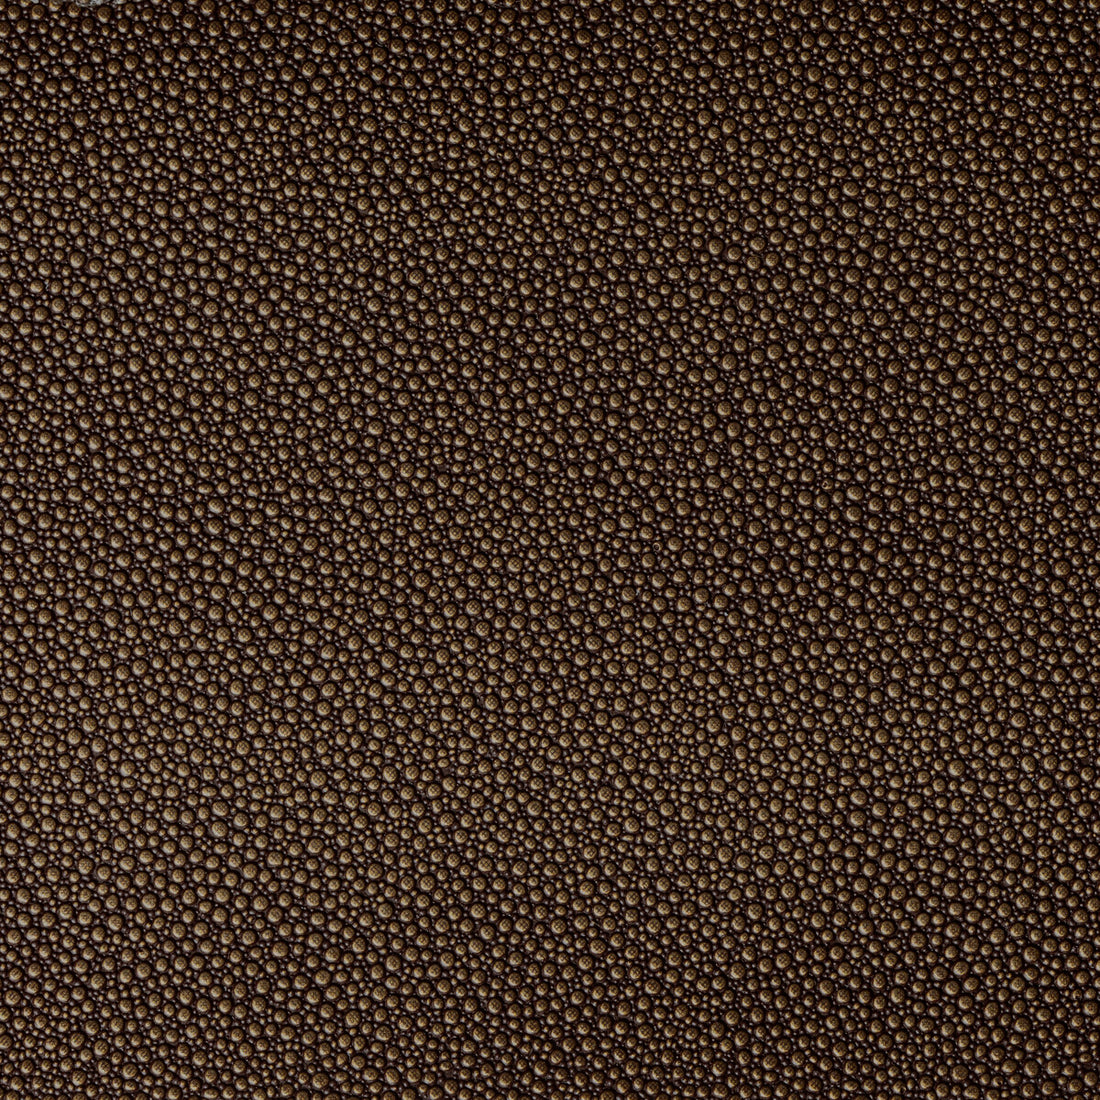 Fetch fabric in burnish color - pattern FETCH.84.0 - by Kravet Contract in the Foundations / Value collection